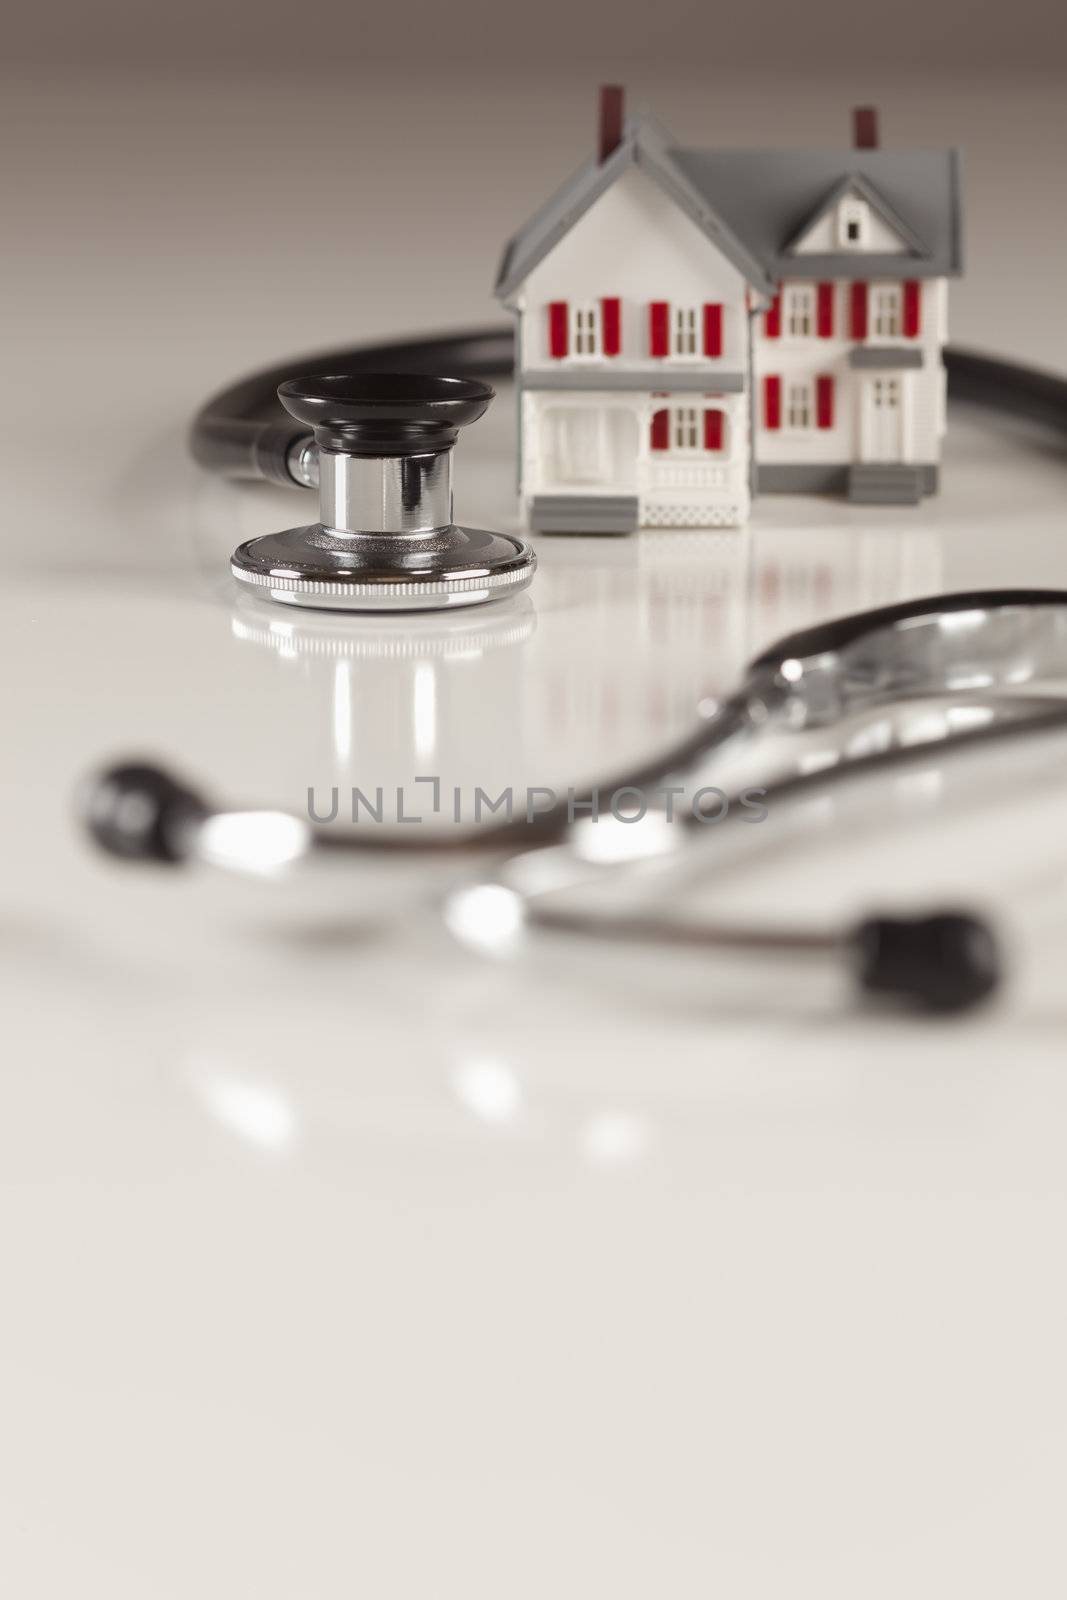 Stethoscope with Small Model Home by Feverpitched